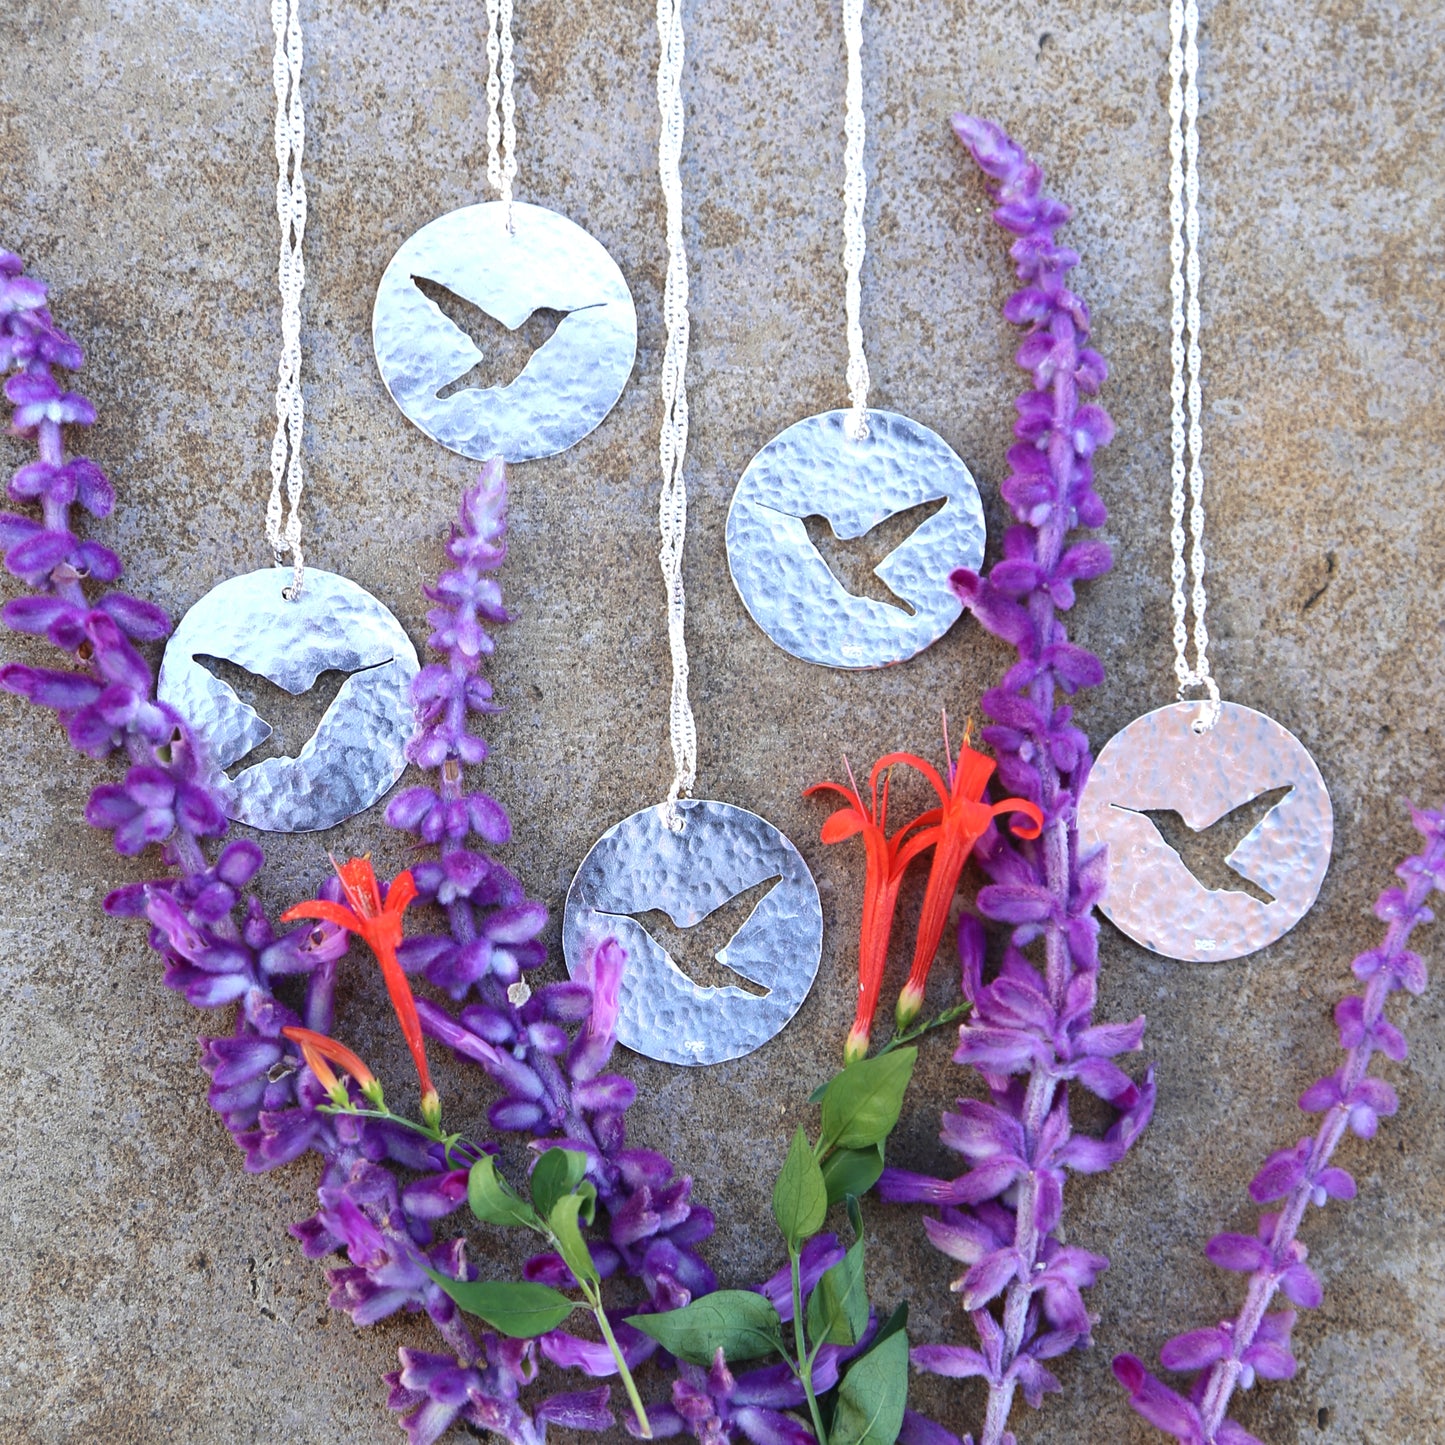 Hummingbird Hand Cut and Hammered Circle Pendant Necklace in Sterling Silver